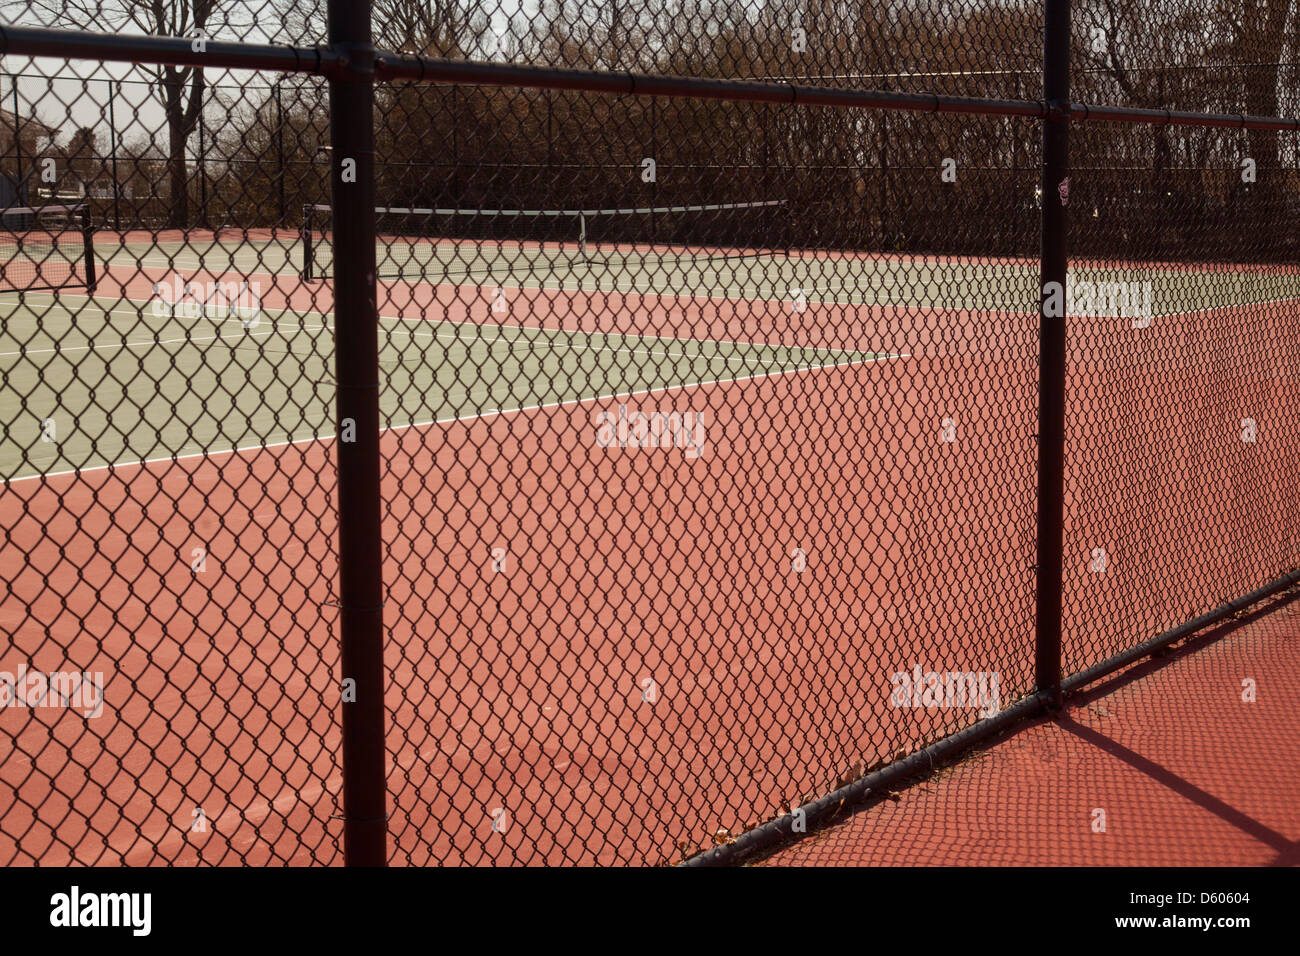 clay tennis courts with fence Stock Photo